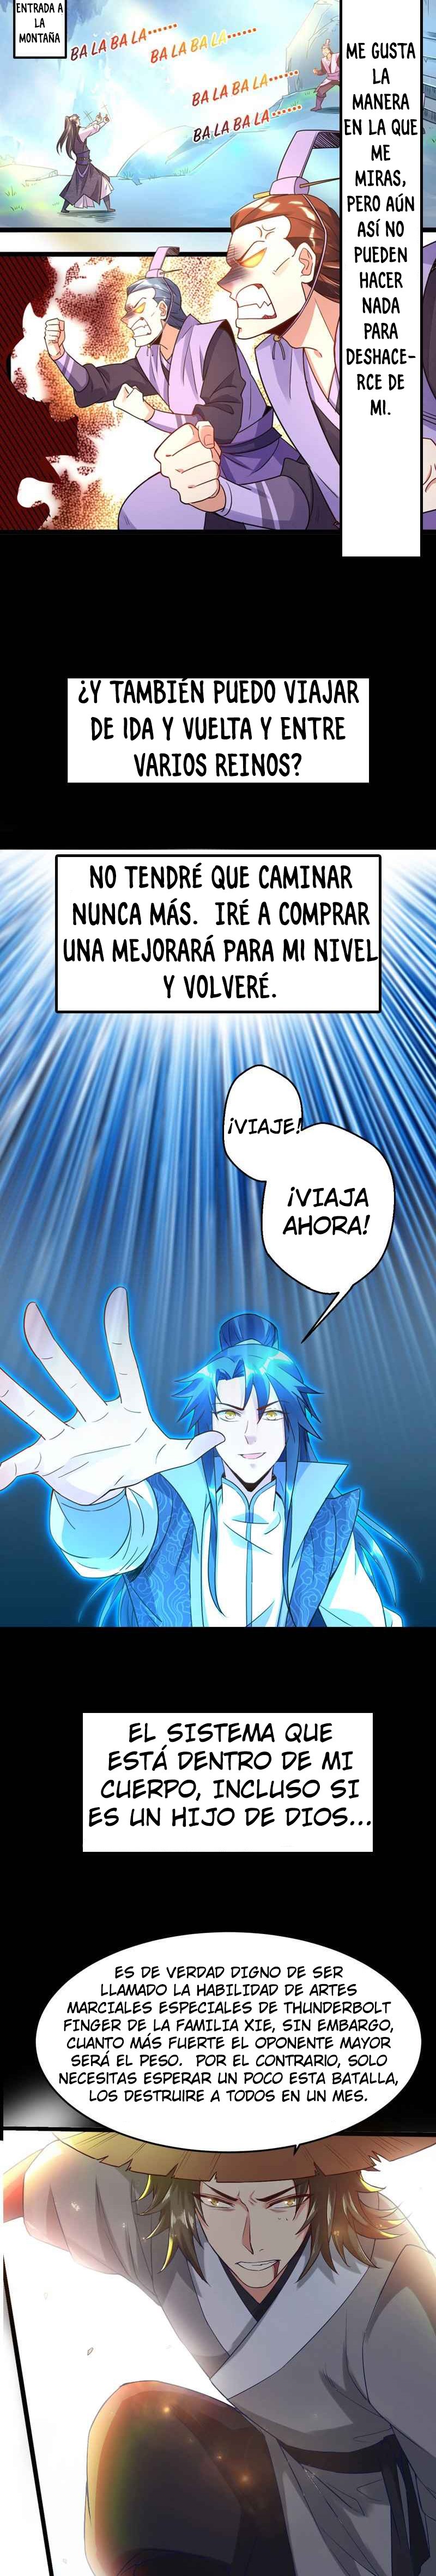 Manga Soy un dios maligno Chapter 0 image number 6